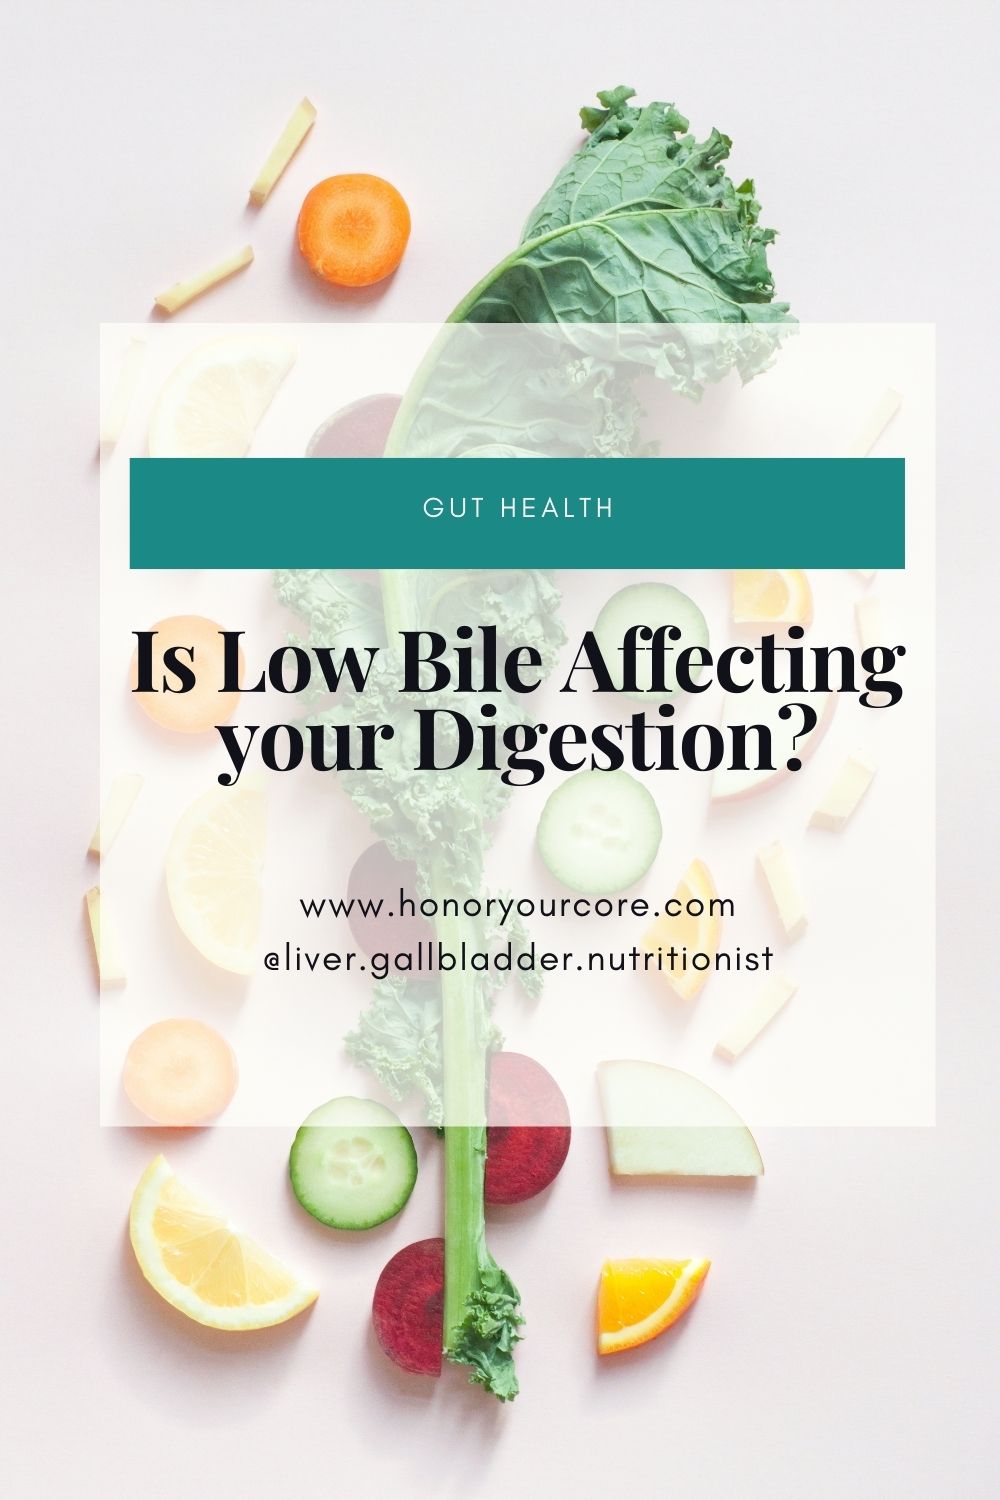 Is Low Bile Causing Your Digestive Issues?